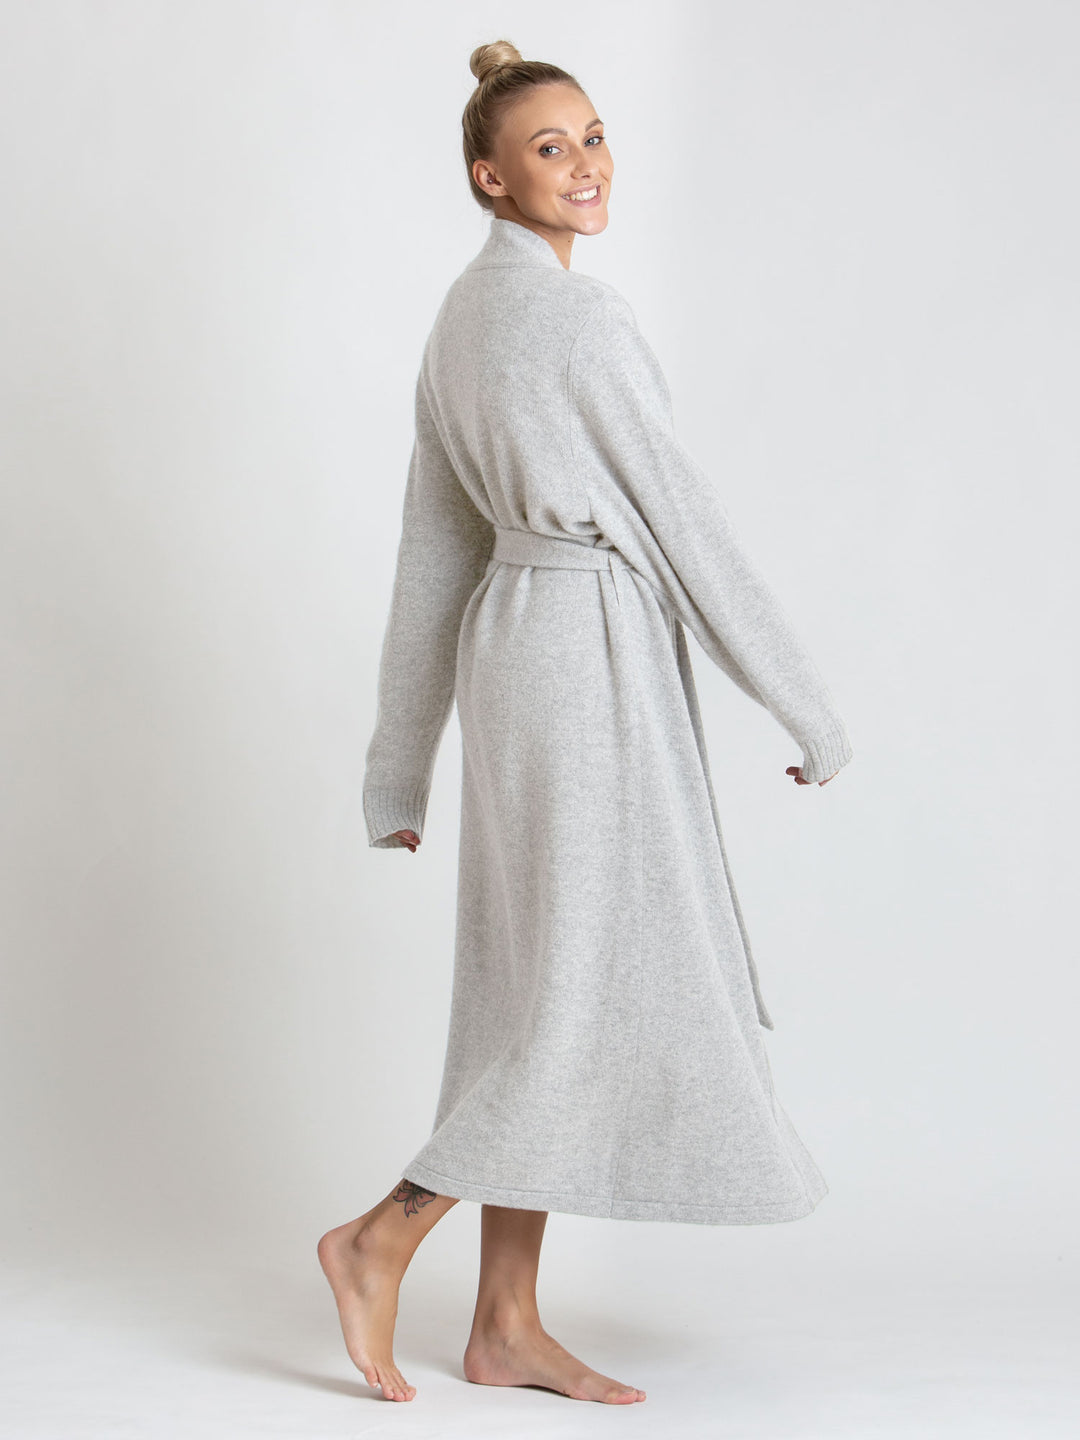 cashmere robe from kashmina, 100% pure cashmere wool, comfort, light grey